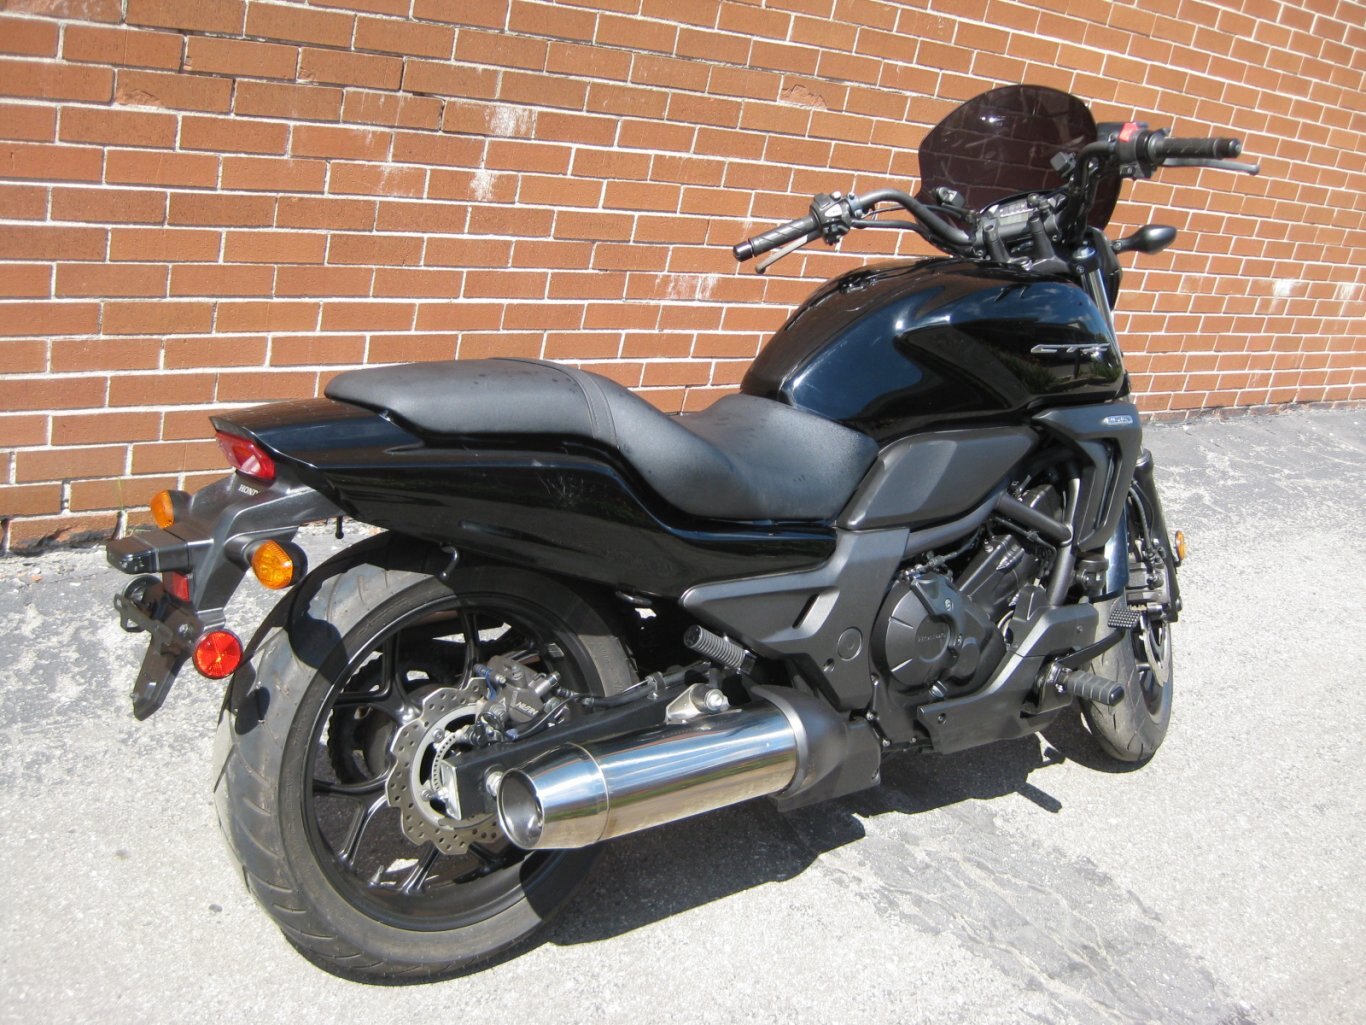 2014 Honda CTX700N SOLD CONGRATULATIONS TO SIR JAMES – A FELLOW “ROAD WARRIOR” !! WELCOME TO THE DARKSIDE & THE COMMUNITY OF MOTORCYCLING ON YOUR DARK HORSE A TWO WHEEL FREEDOM MACHINE” WITH THANKS FROM GARY & TEAM CYCLE WORLD!!!!